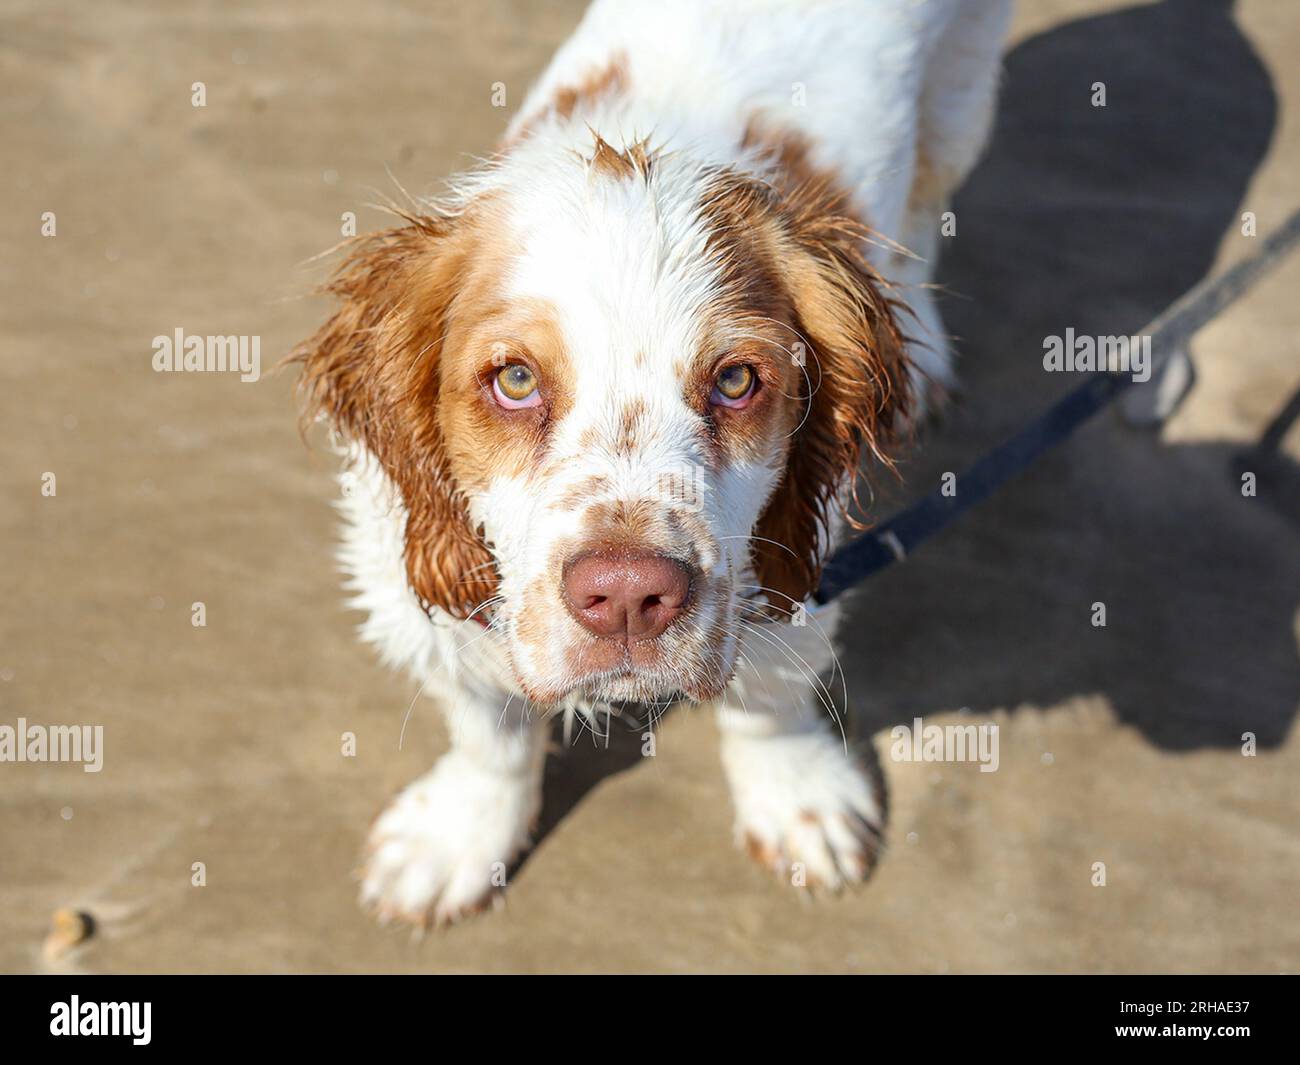 Working Clumber Spaniel Puppy on North Yorkshire Beach Stock Photo